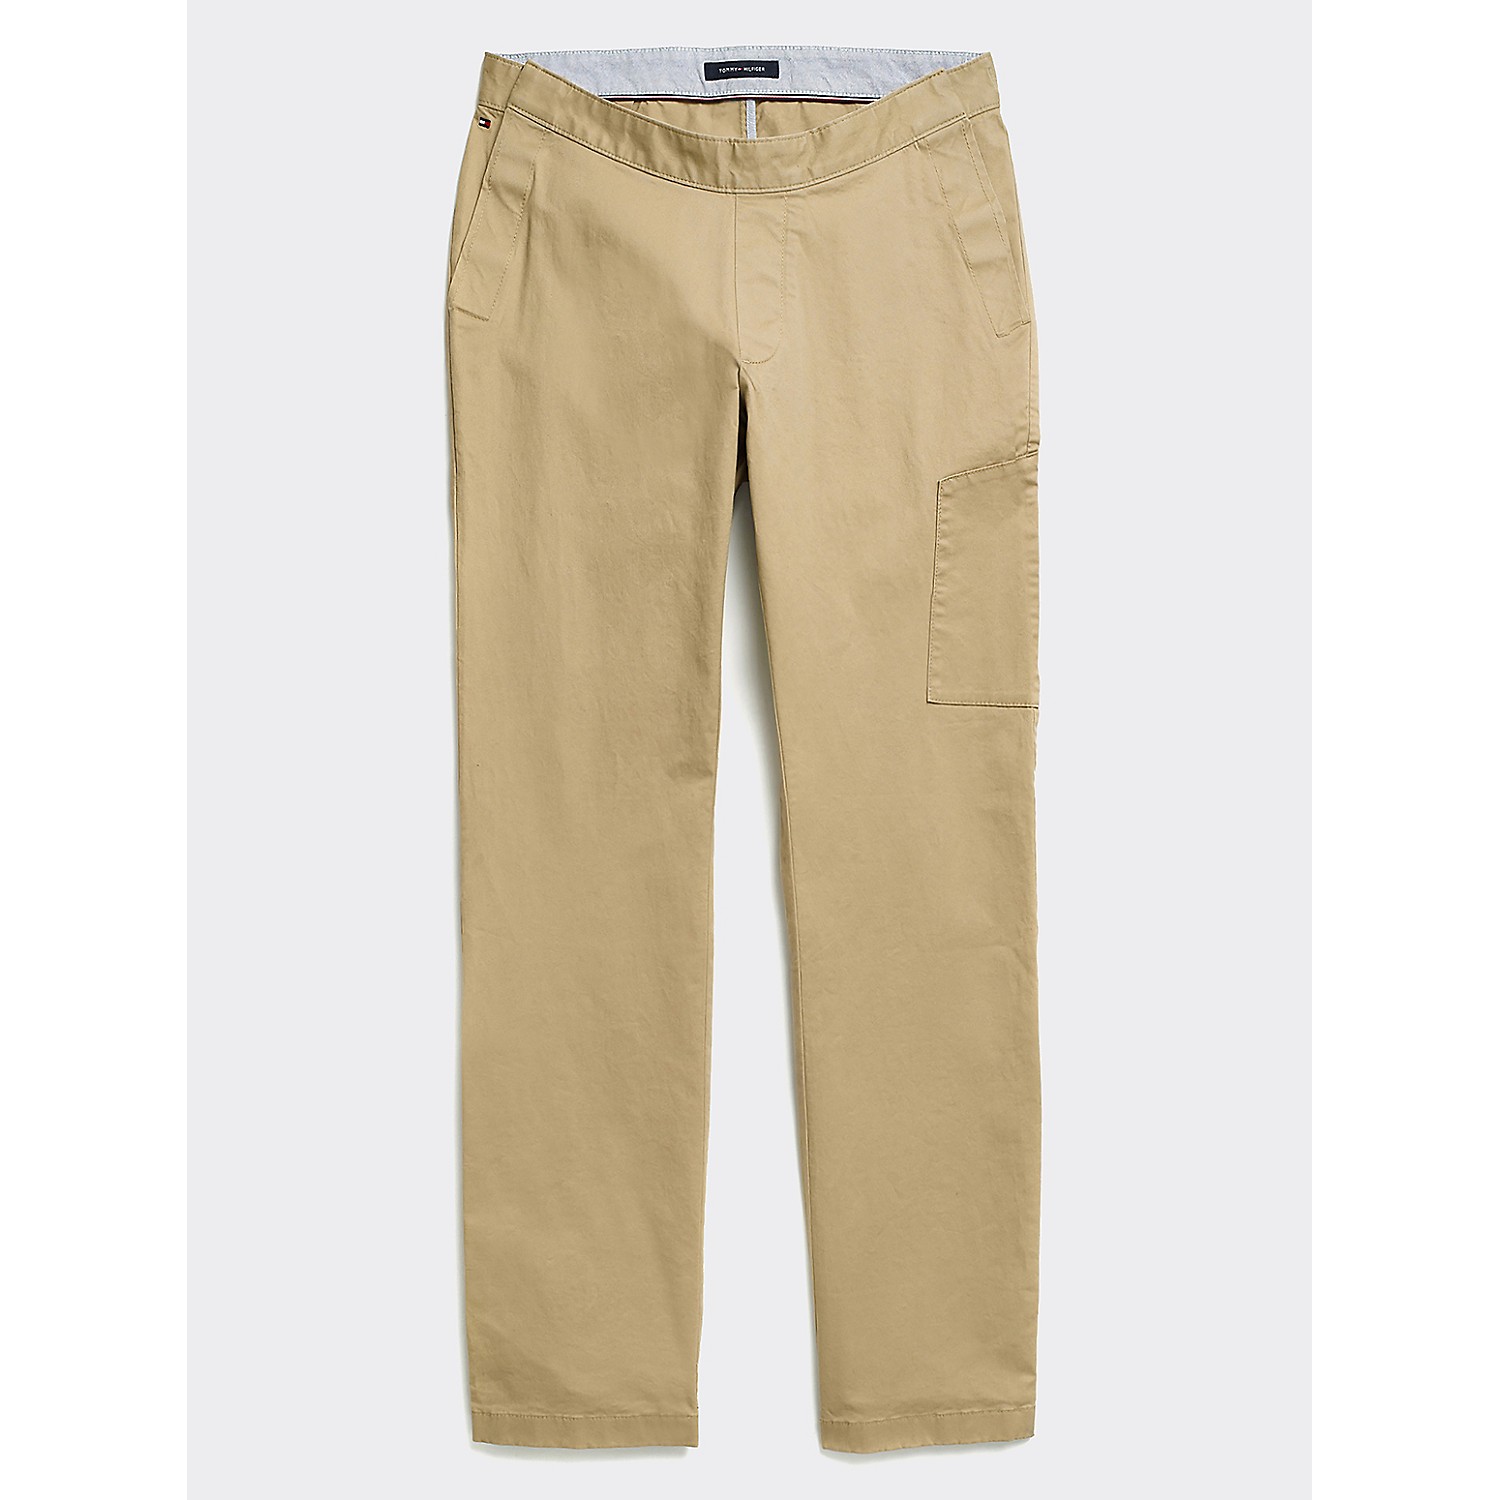 TOMMY HILFIGER Seated Fit Classic Chino